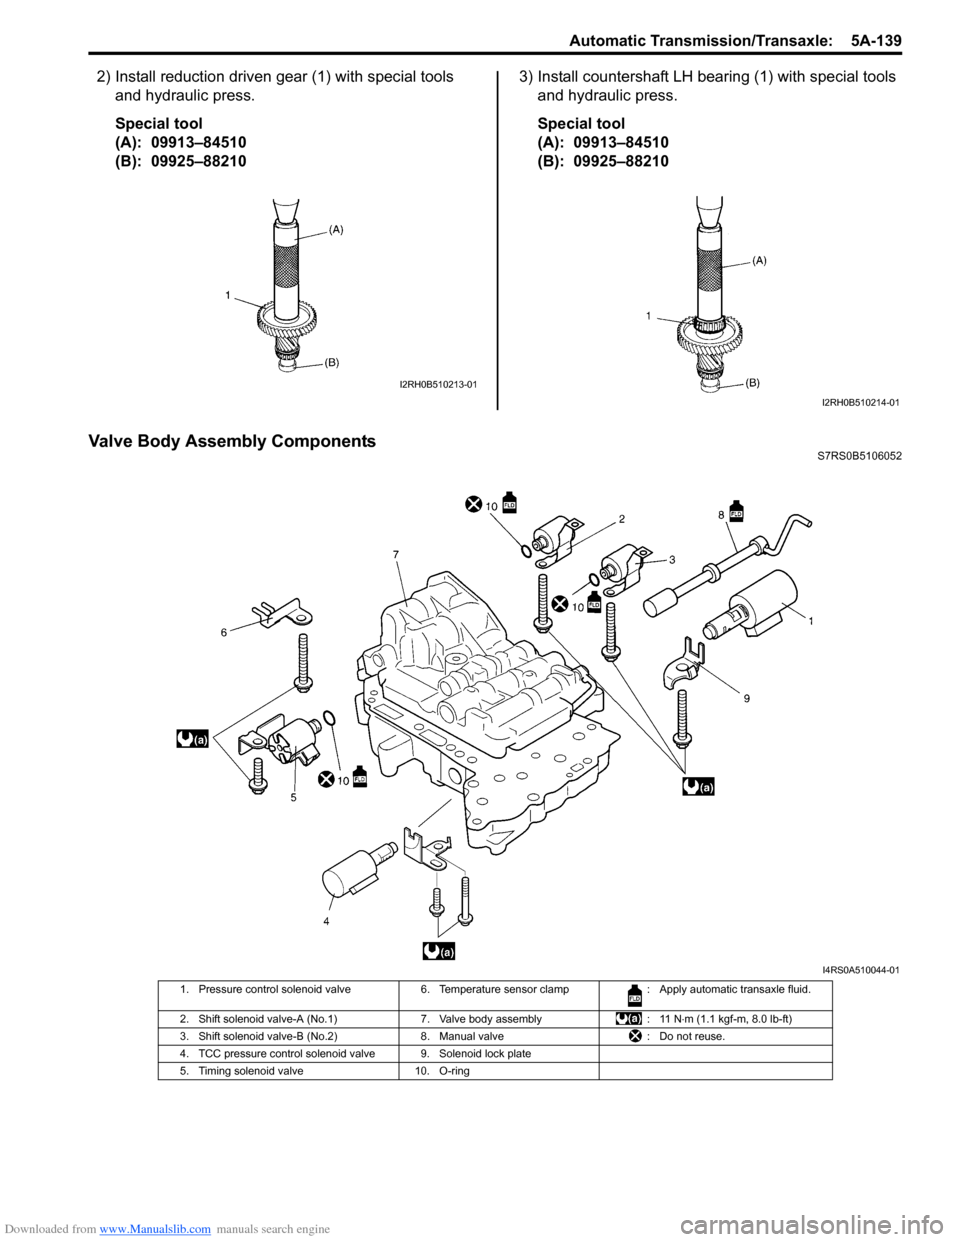 SUZUKI SWIFT 2007 2.G Service Service Manual Downloaded from www.Manualslib.com manuals search engine Automatic Transmission/Transaxle:  5A-139
2) Install reduction driven gear (1) with special tools and hydraulic press.
Special tool
(A):  09913